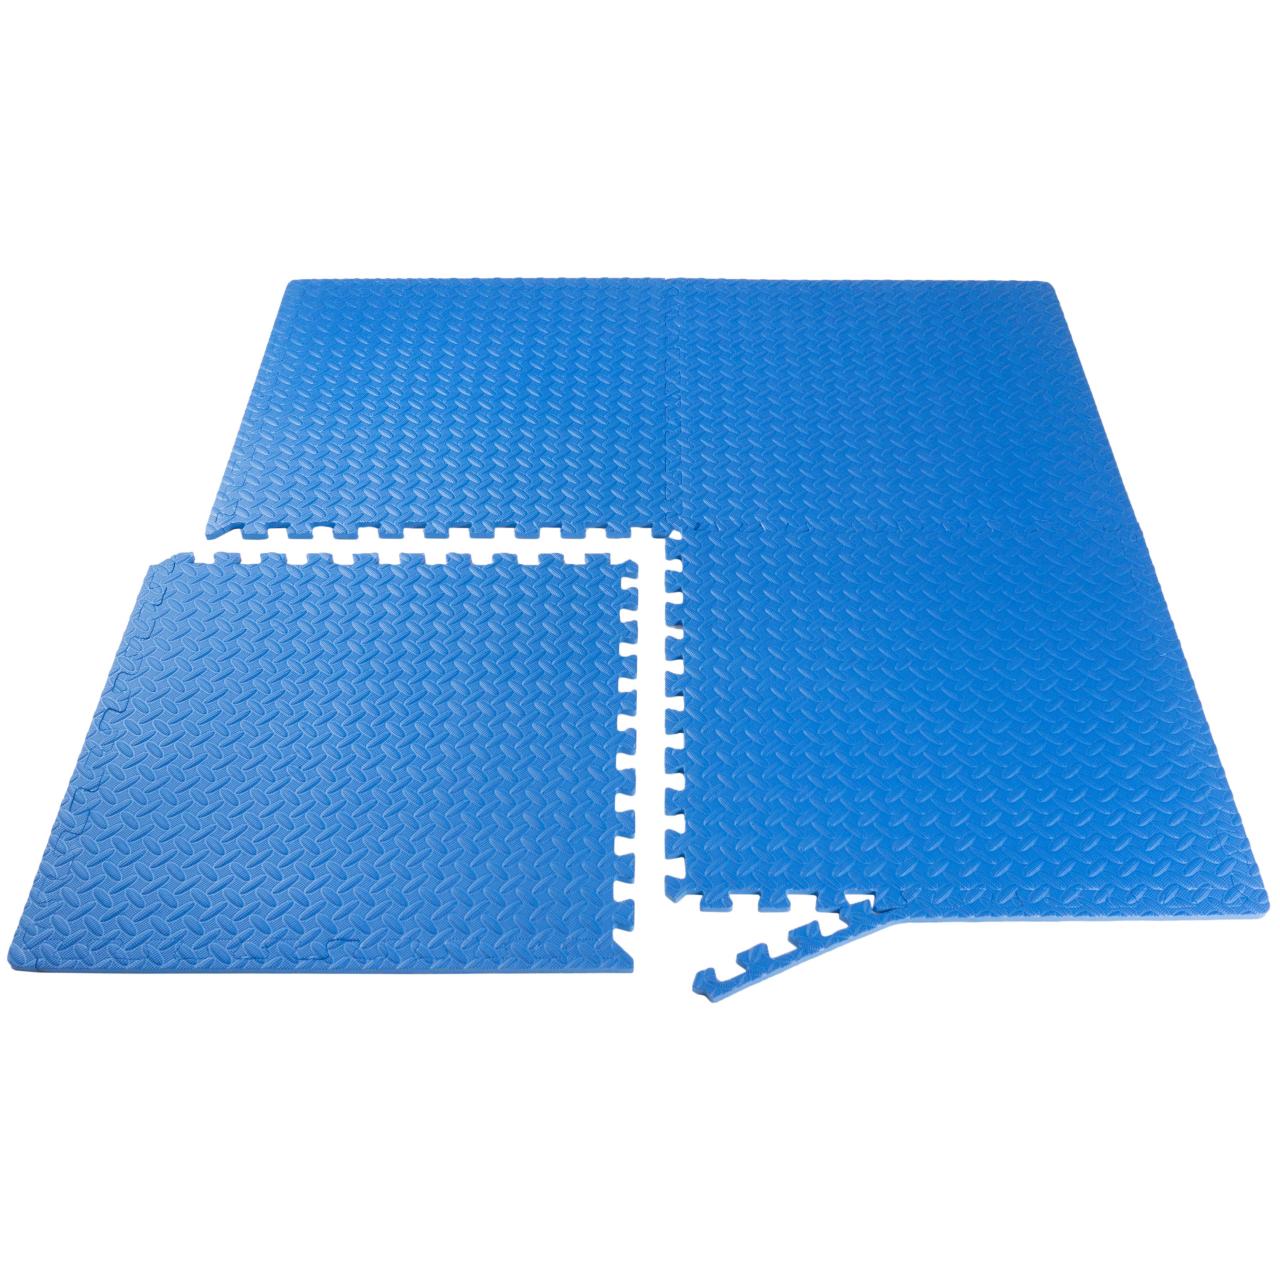 ProsourceFit Puzzle Exercise Mat Review: Inexpensive and Durable